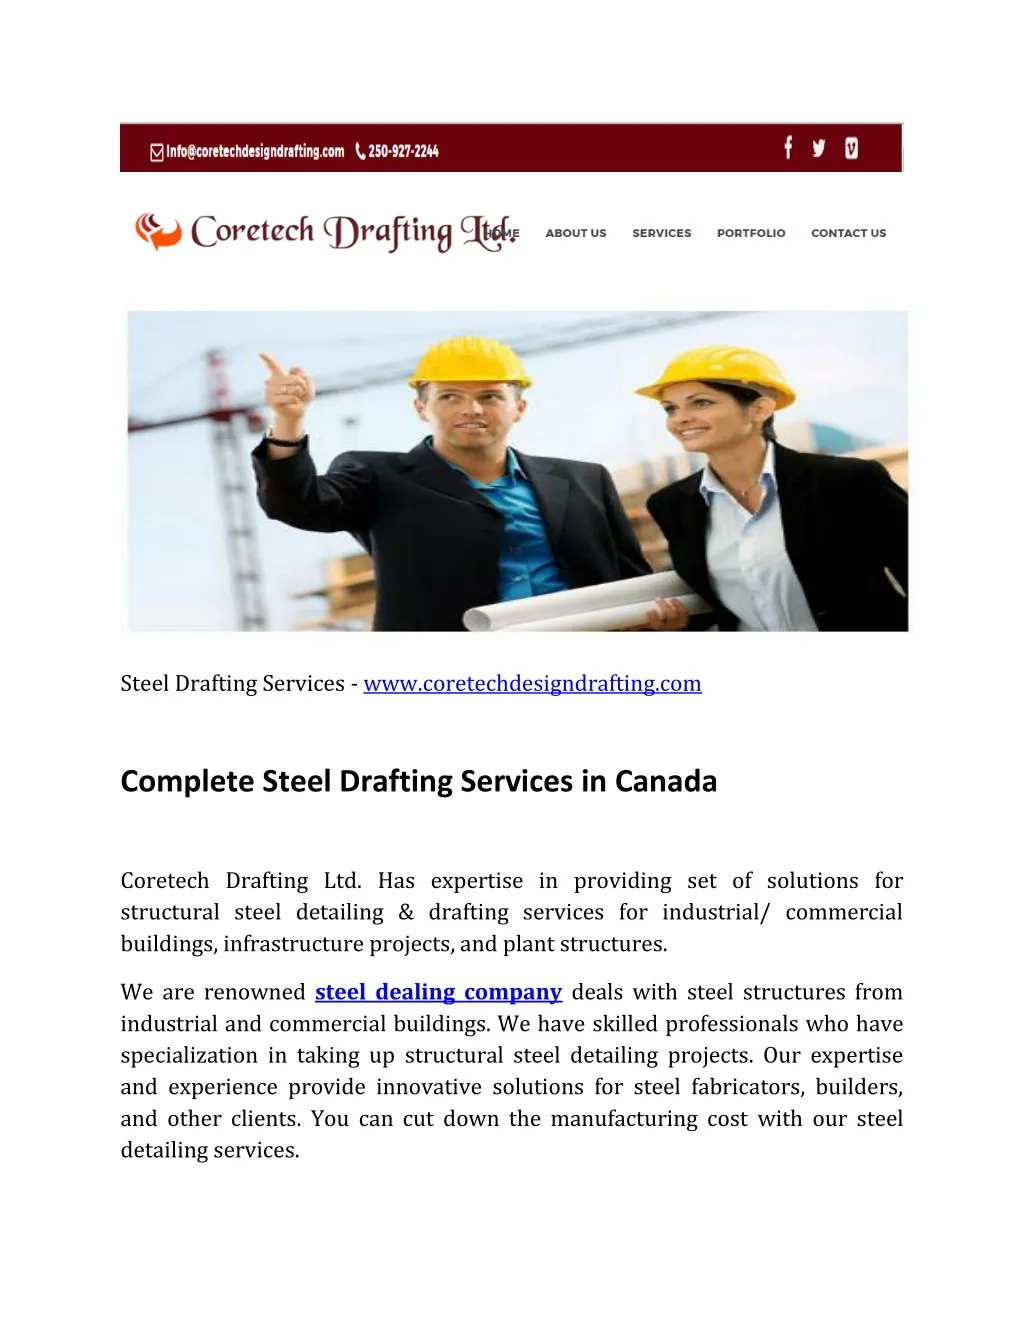 steel drafting services